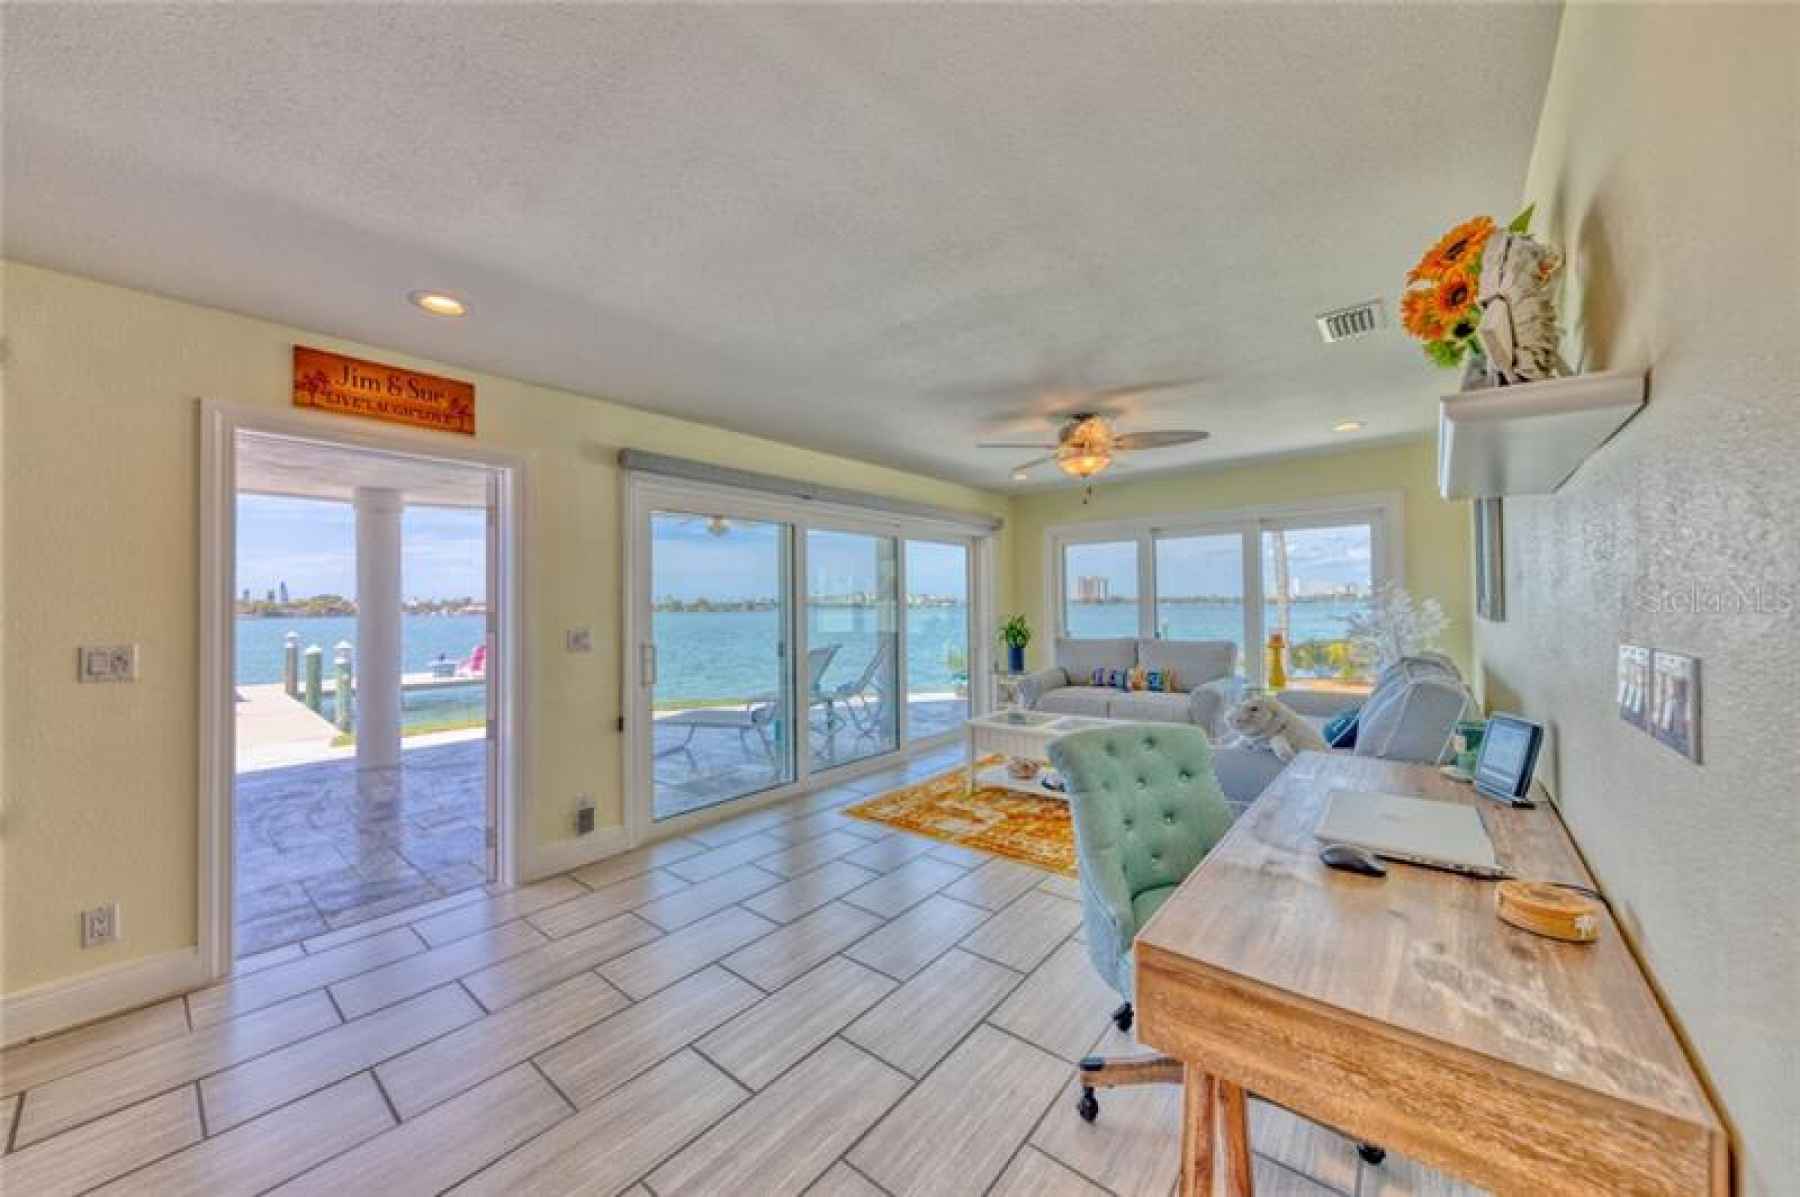 Entertainment area #1 with triple sliders that open up to let the sunshine and fresh sea air in!